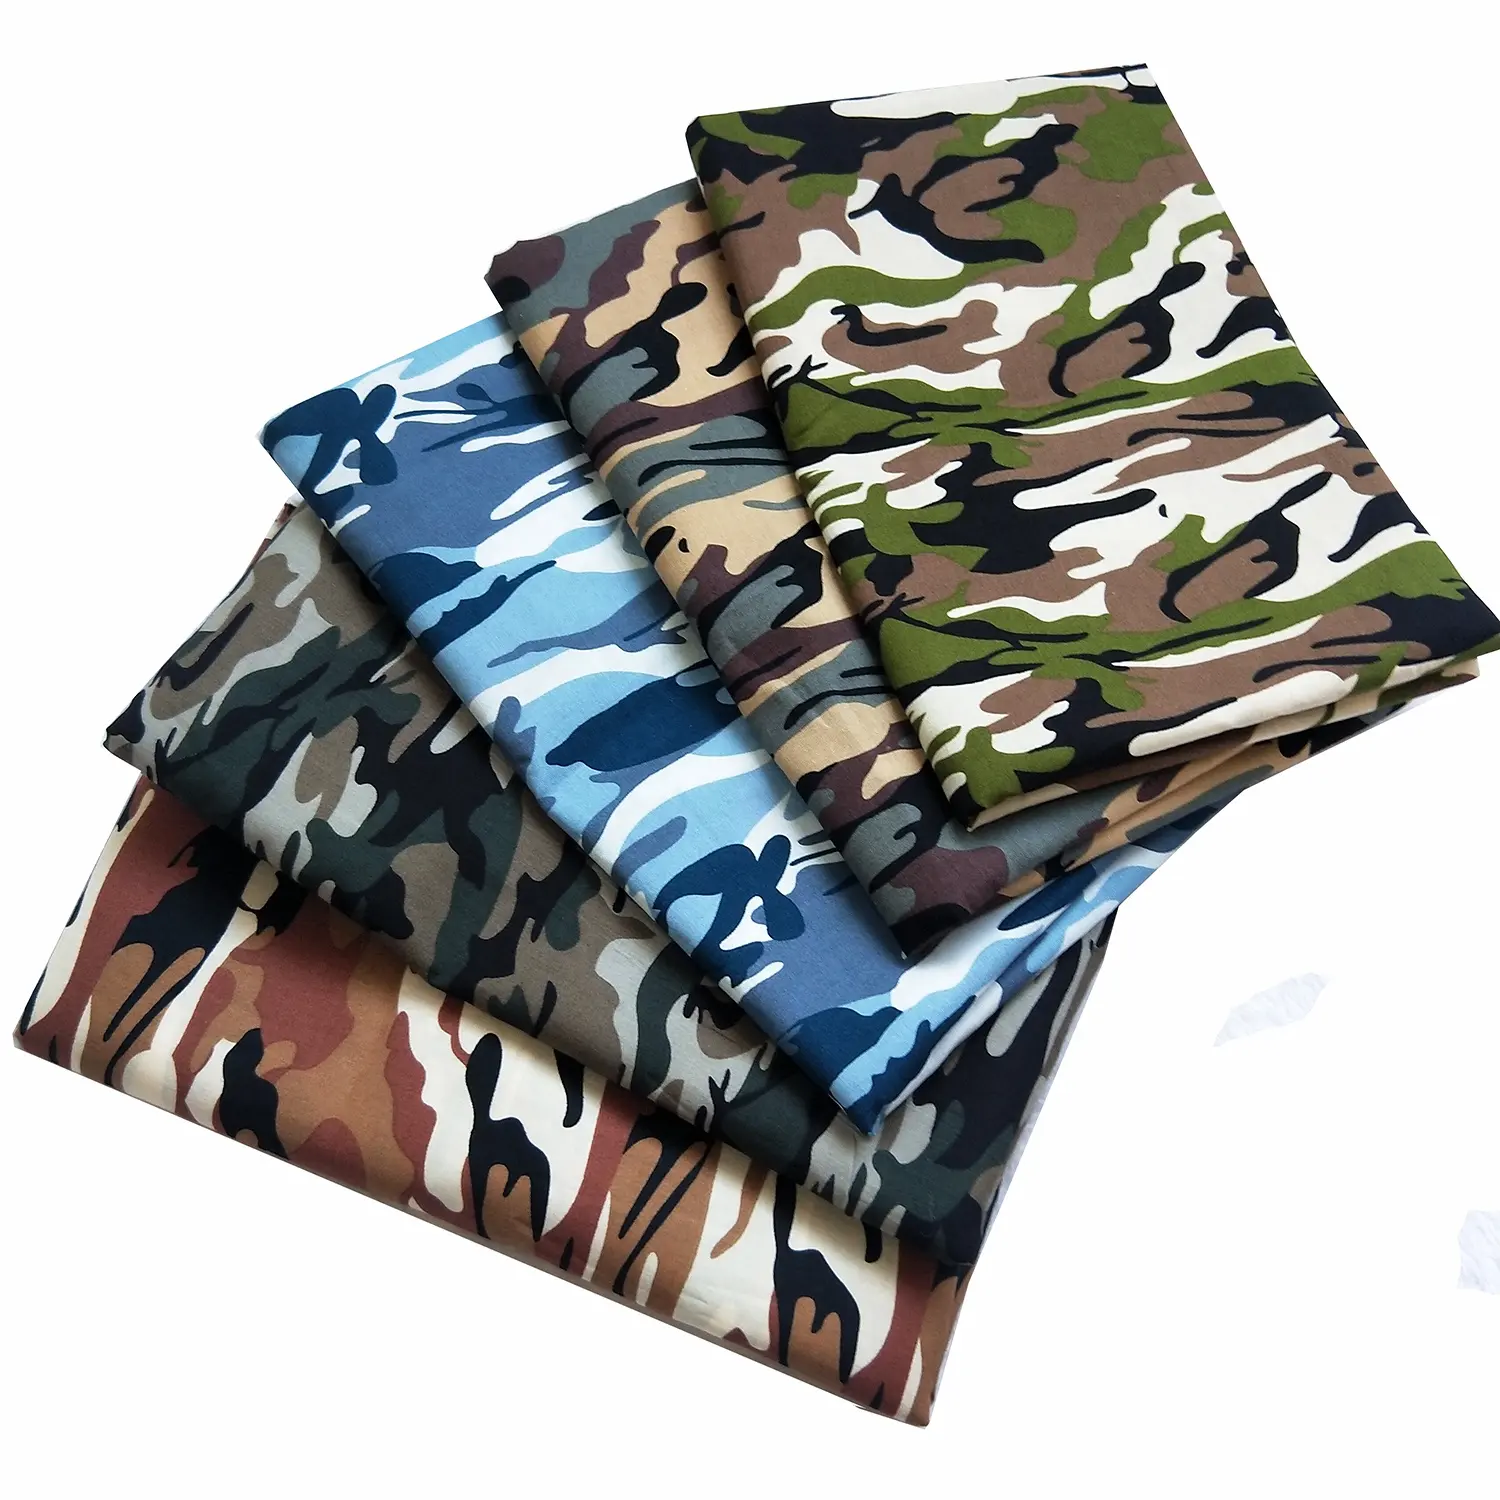 Hot Sale Camouflage Printed Poplin 100% Cotton Fabric Wholesale For Face Mask T Shirts Shorts Scarf